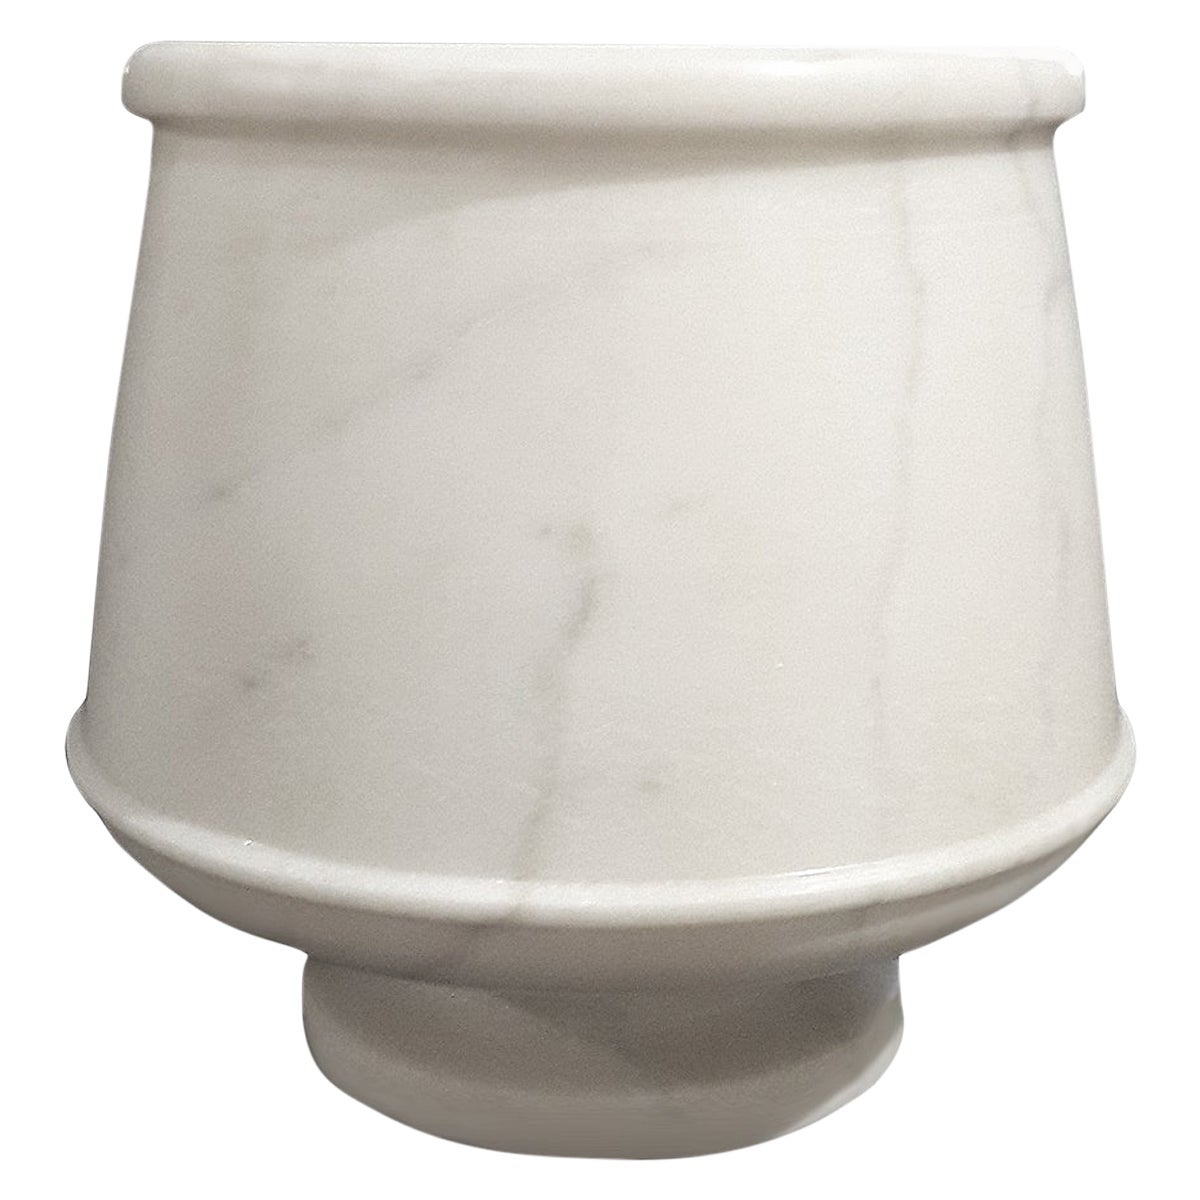 Hand-Carved Marble Goblet or Vase from India